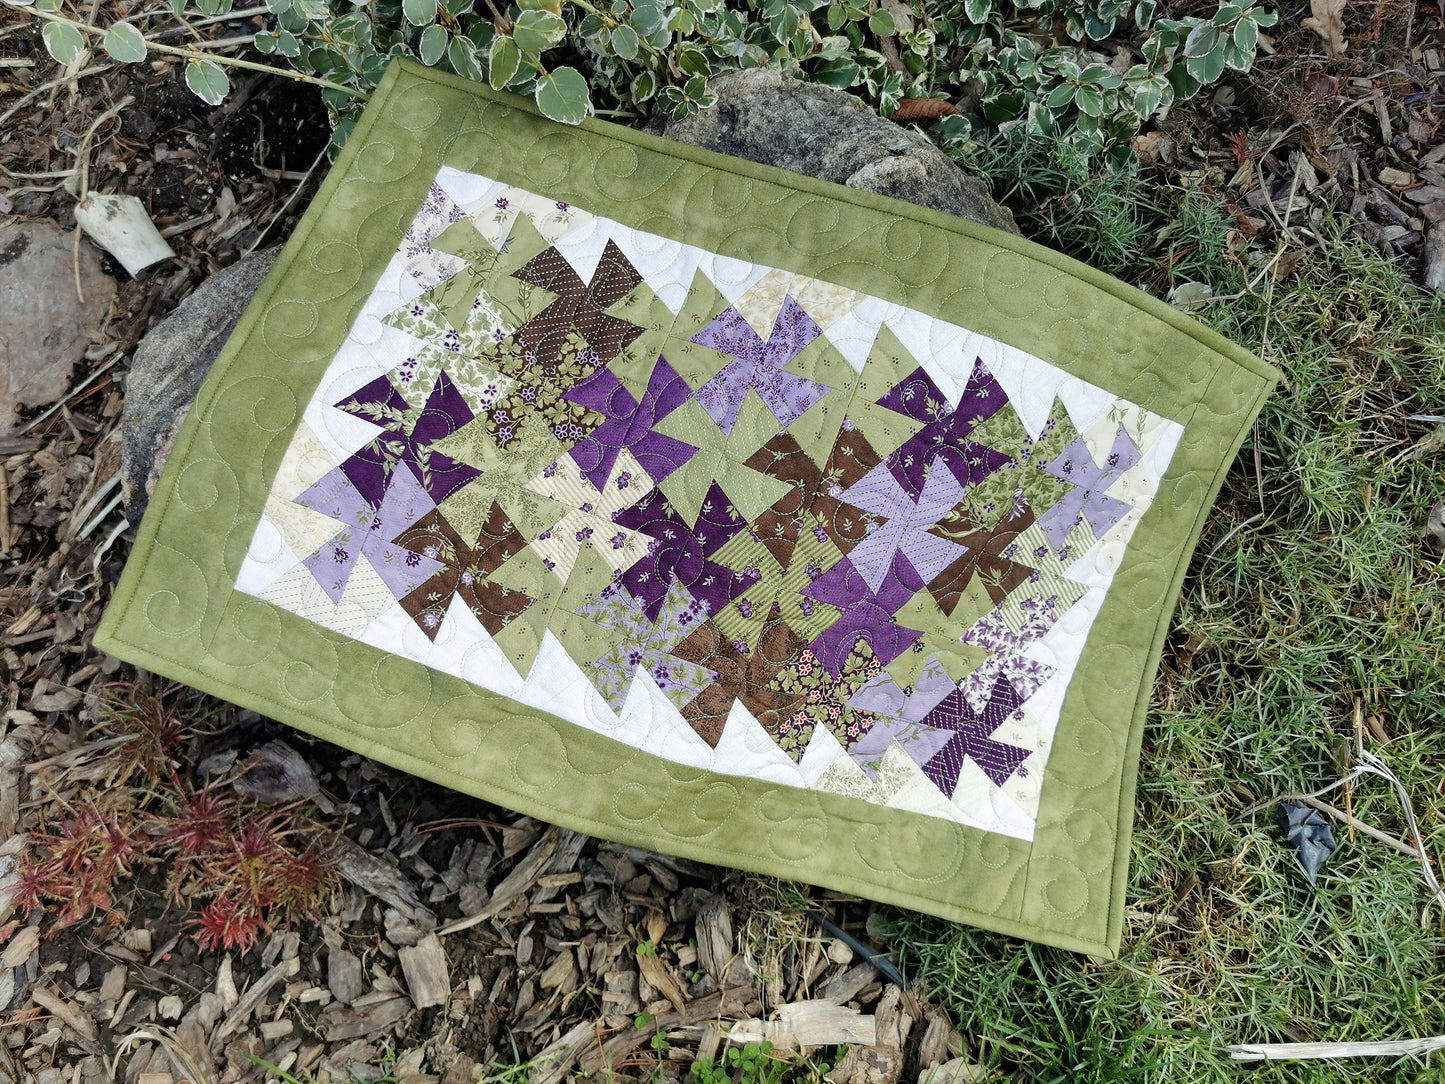 The table runner is shown outdoors, draped over a garden rock. the natural light shows the pretty spring green with purple, brown and cream accents in the scrappy twister piecing in the center of the runner.